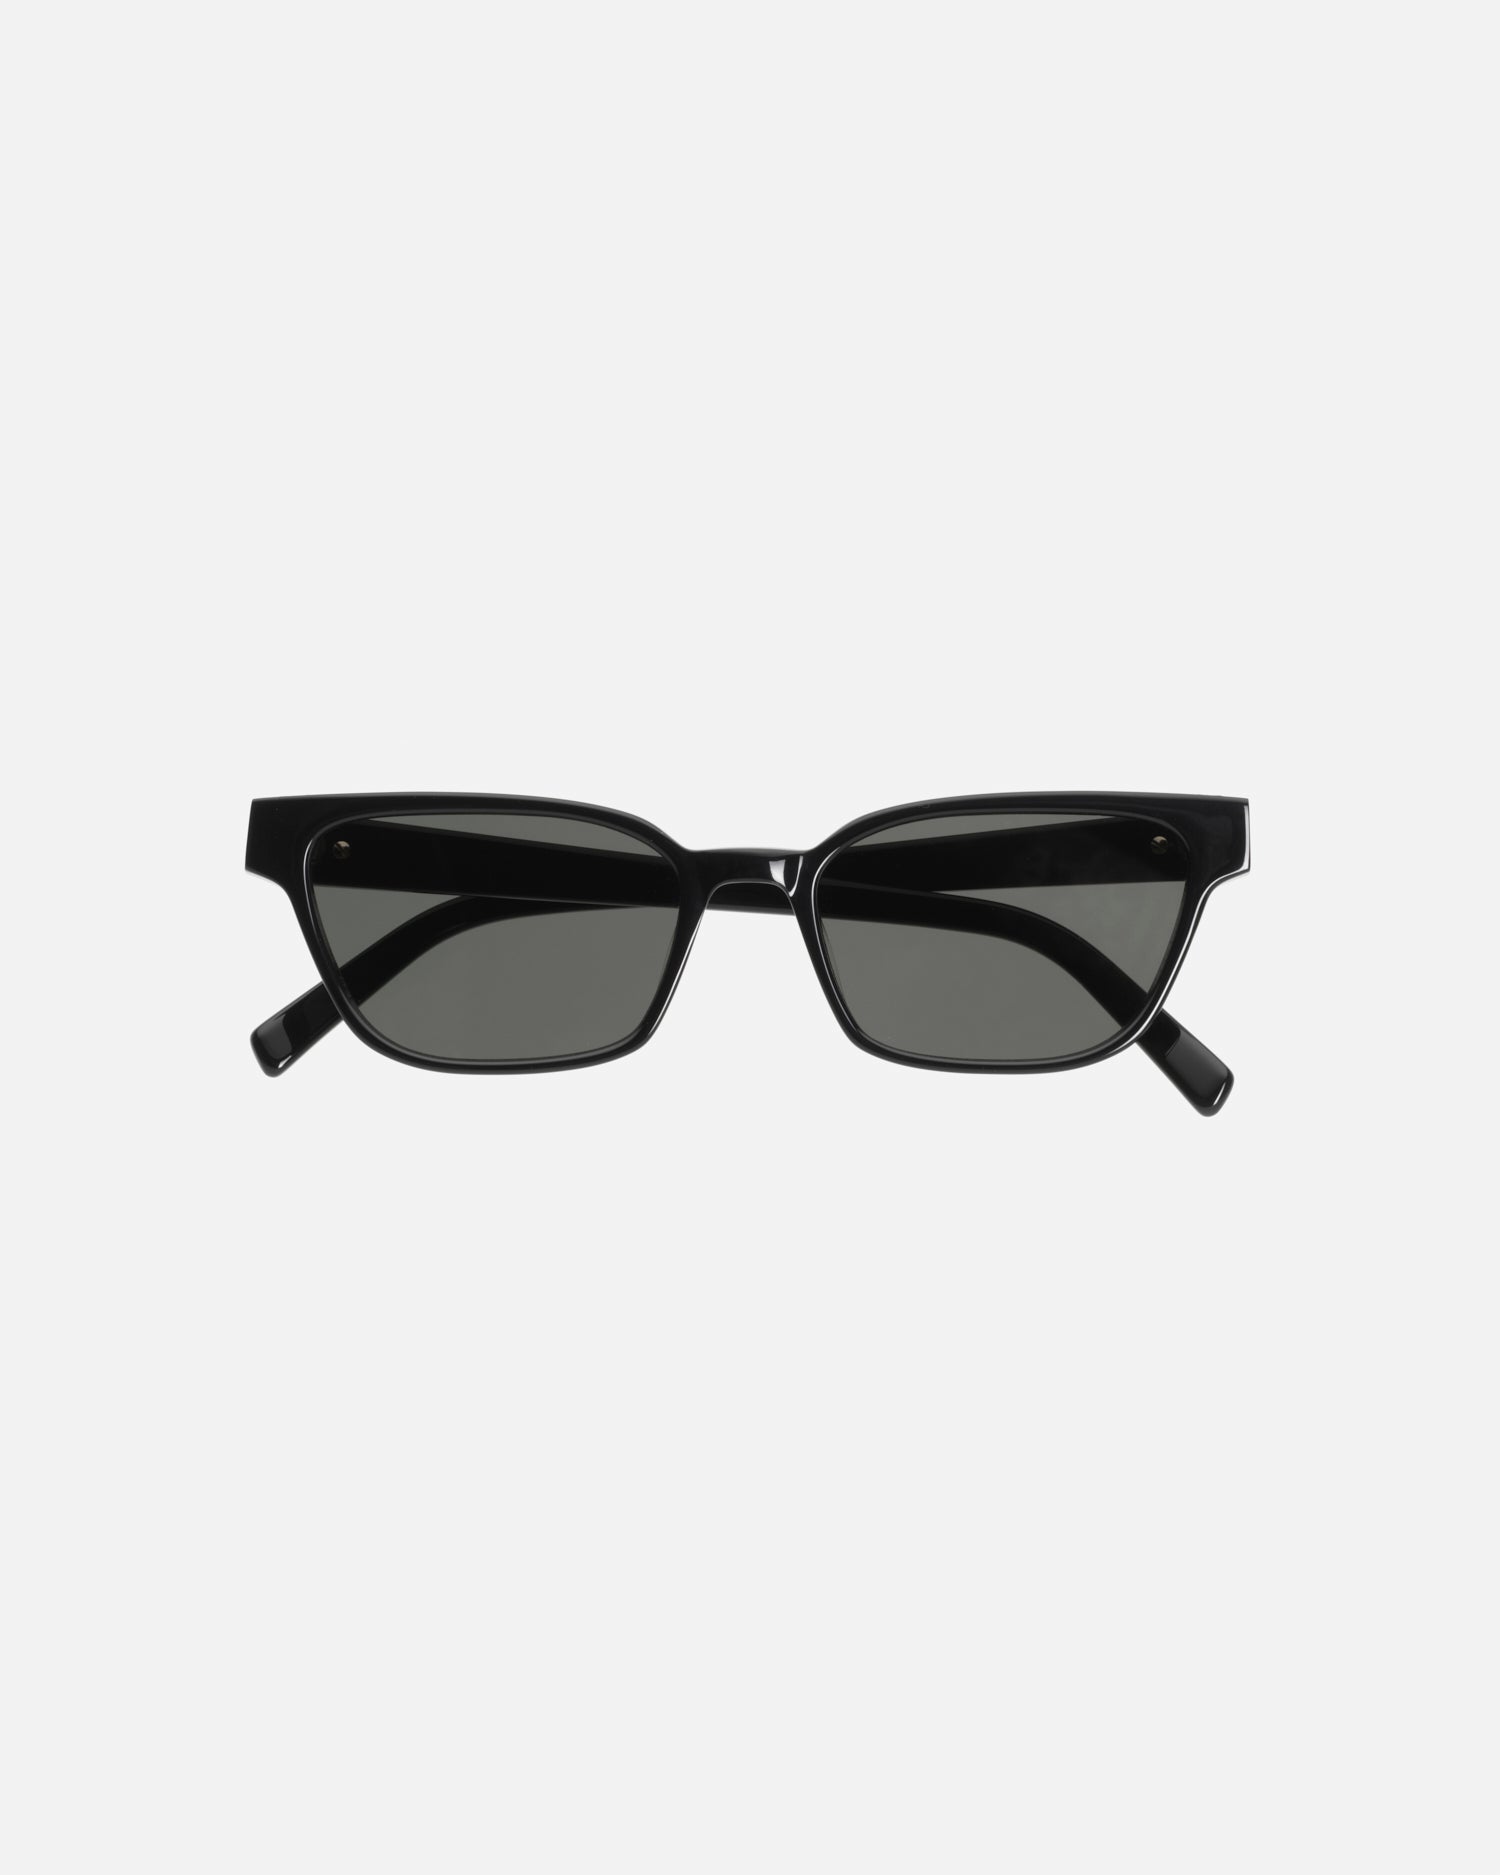 The Visionary luxe sunglasses by Velvet Canyon in Black